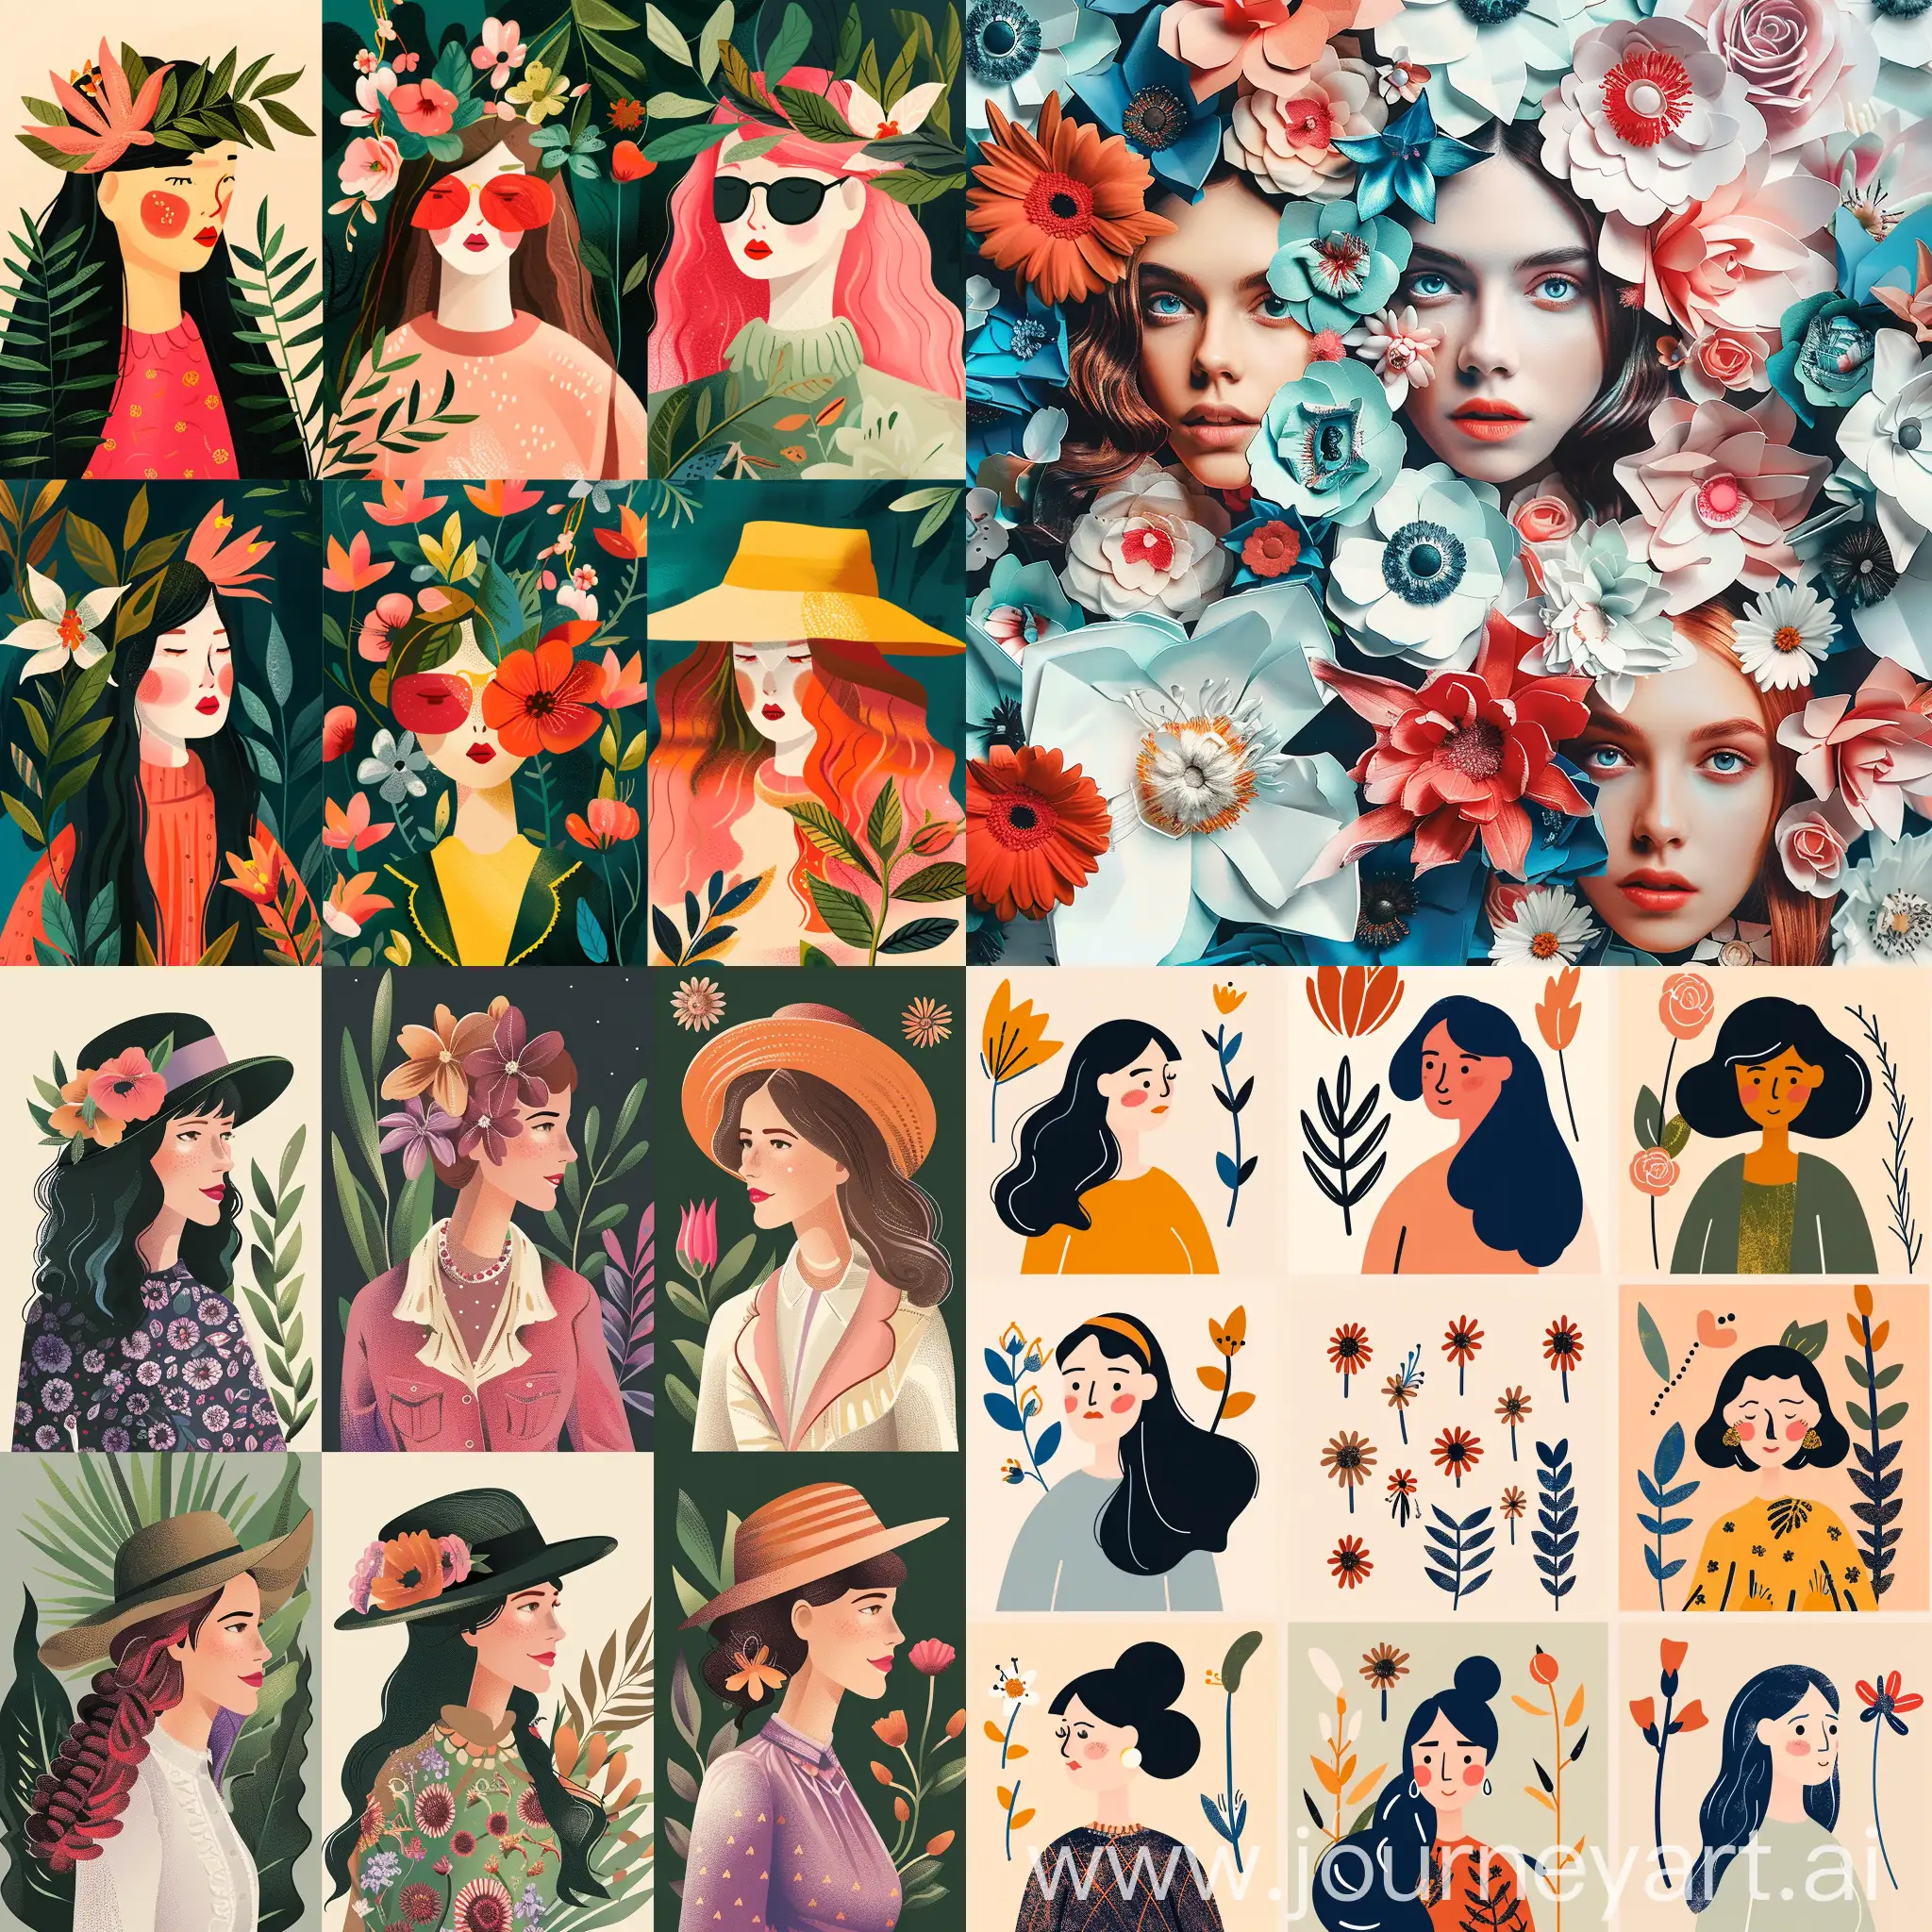 ledies and flowers, collage in flat style, high quality details,